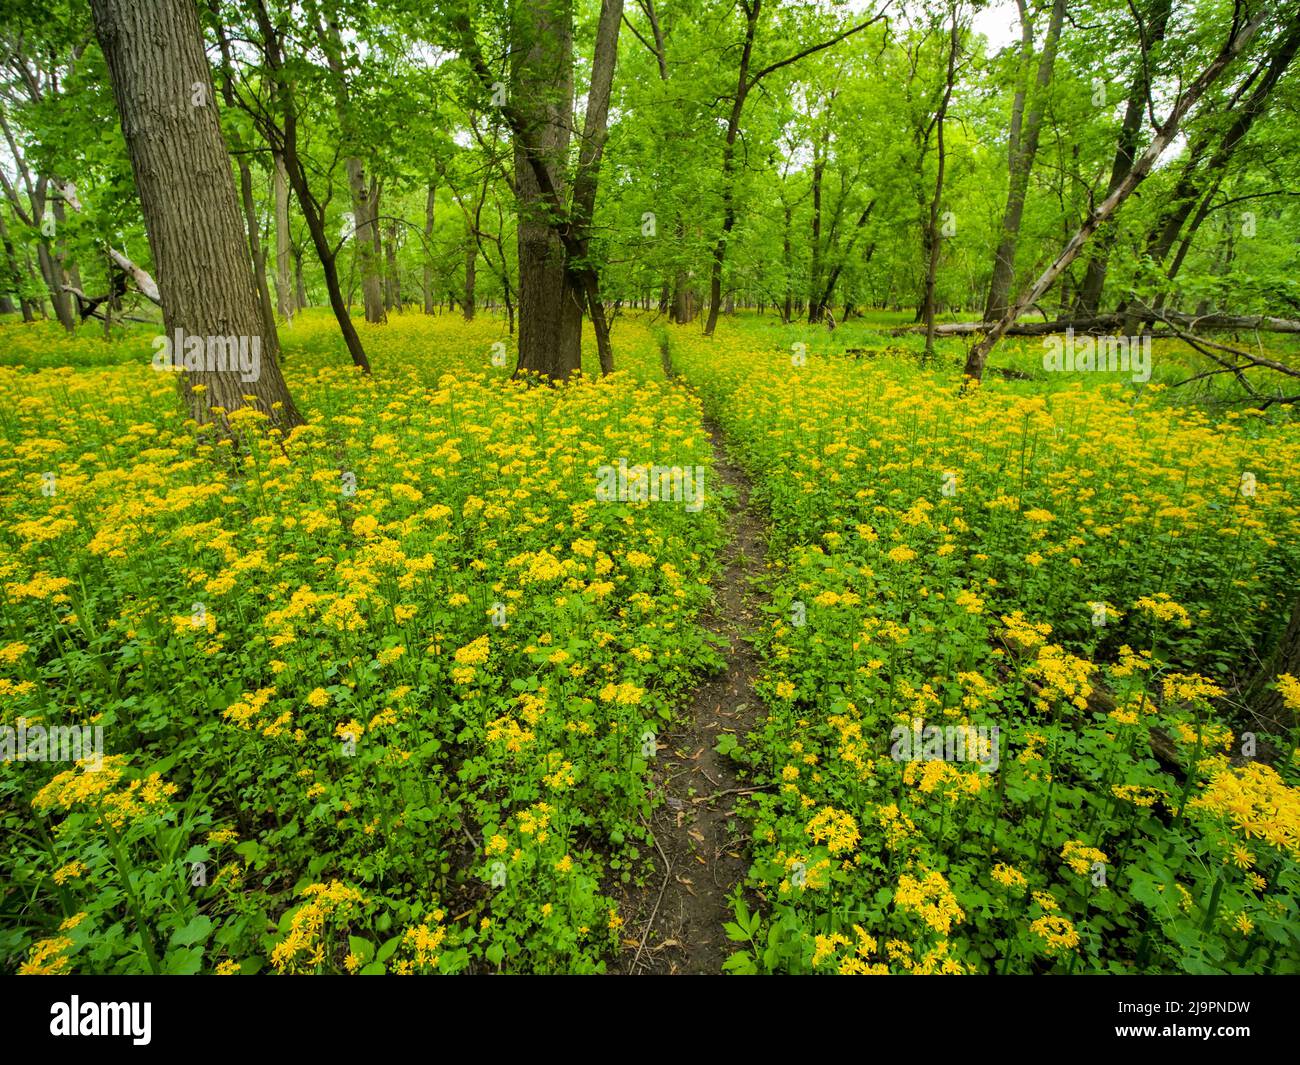 Butterweed (Packera glabella) flowering on the Des Plaines River floodplain in Thatcher Woods near Chicago, Illinois. Butterweed is native to southern Illinois but has extended its range north over the last few decades as the climate has warmed. Stock Photo